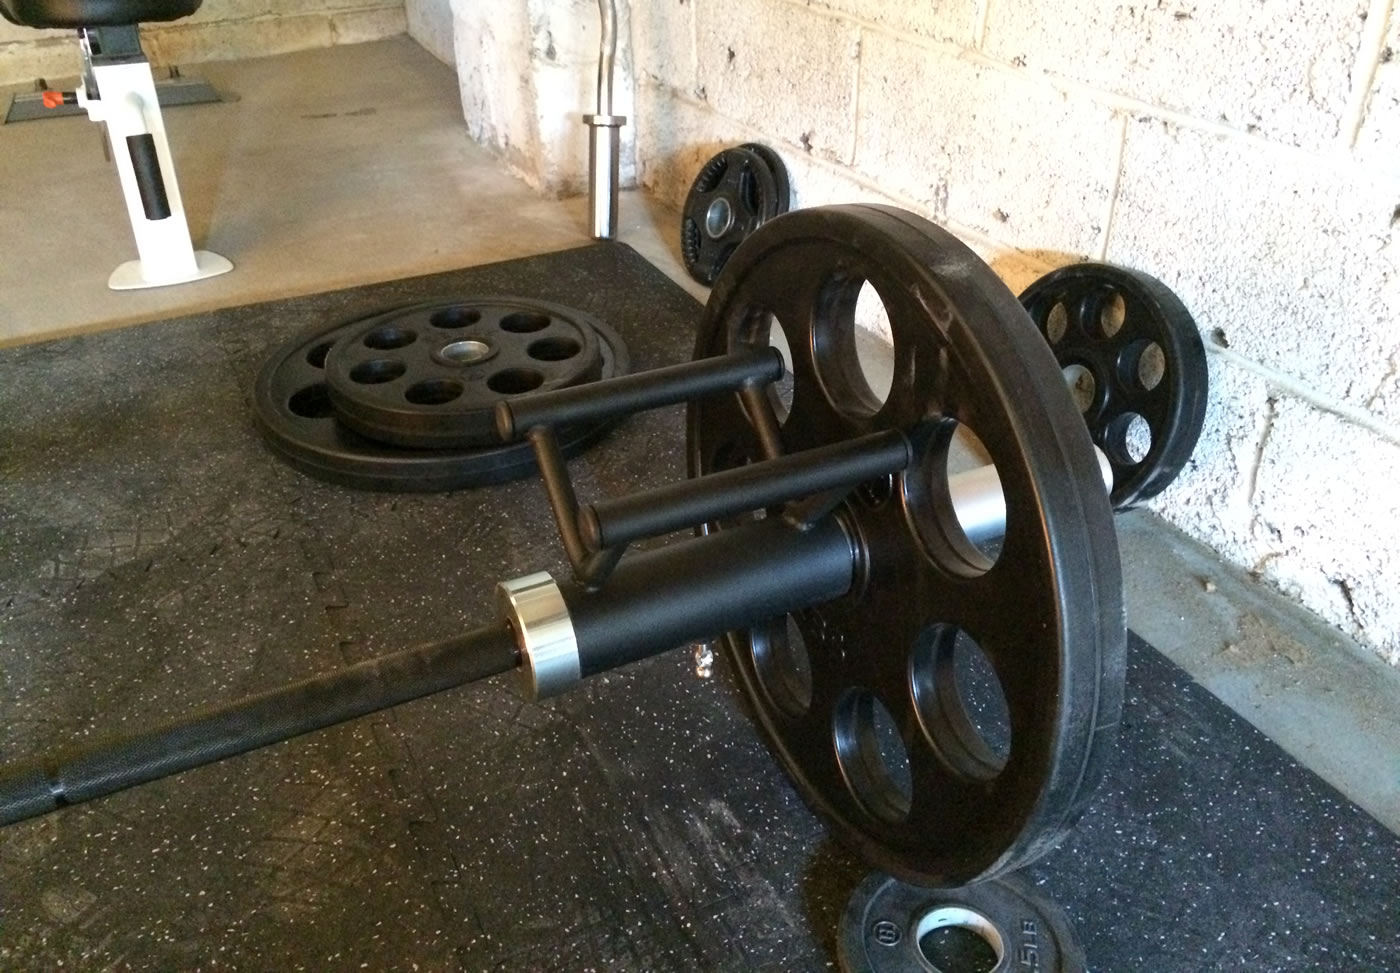 Home gym - CFF landmine double d olympic bar rowing attachment.